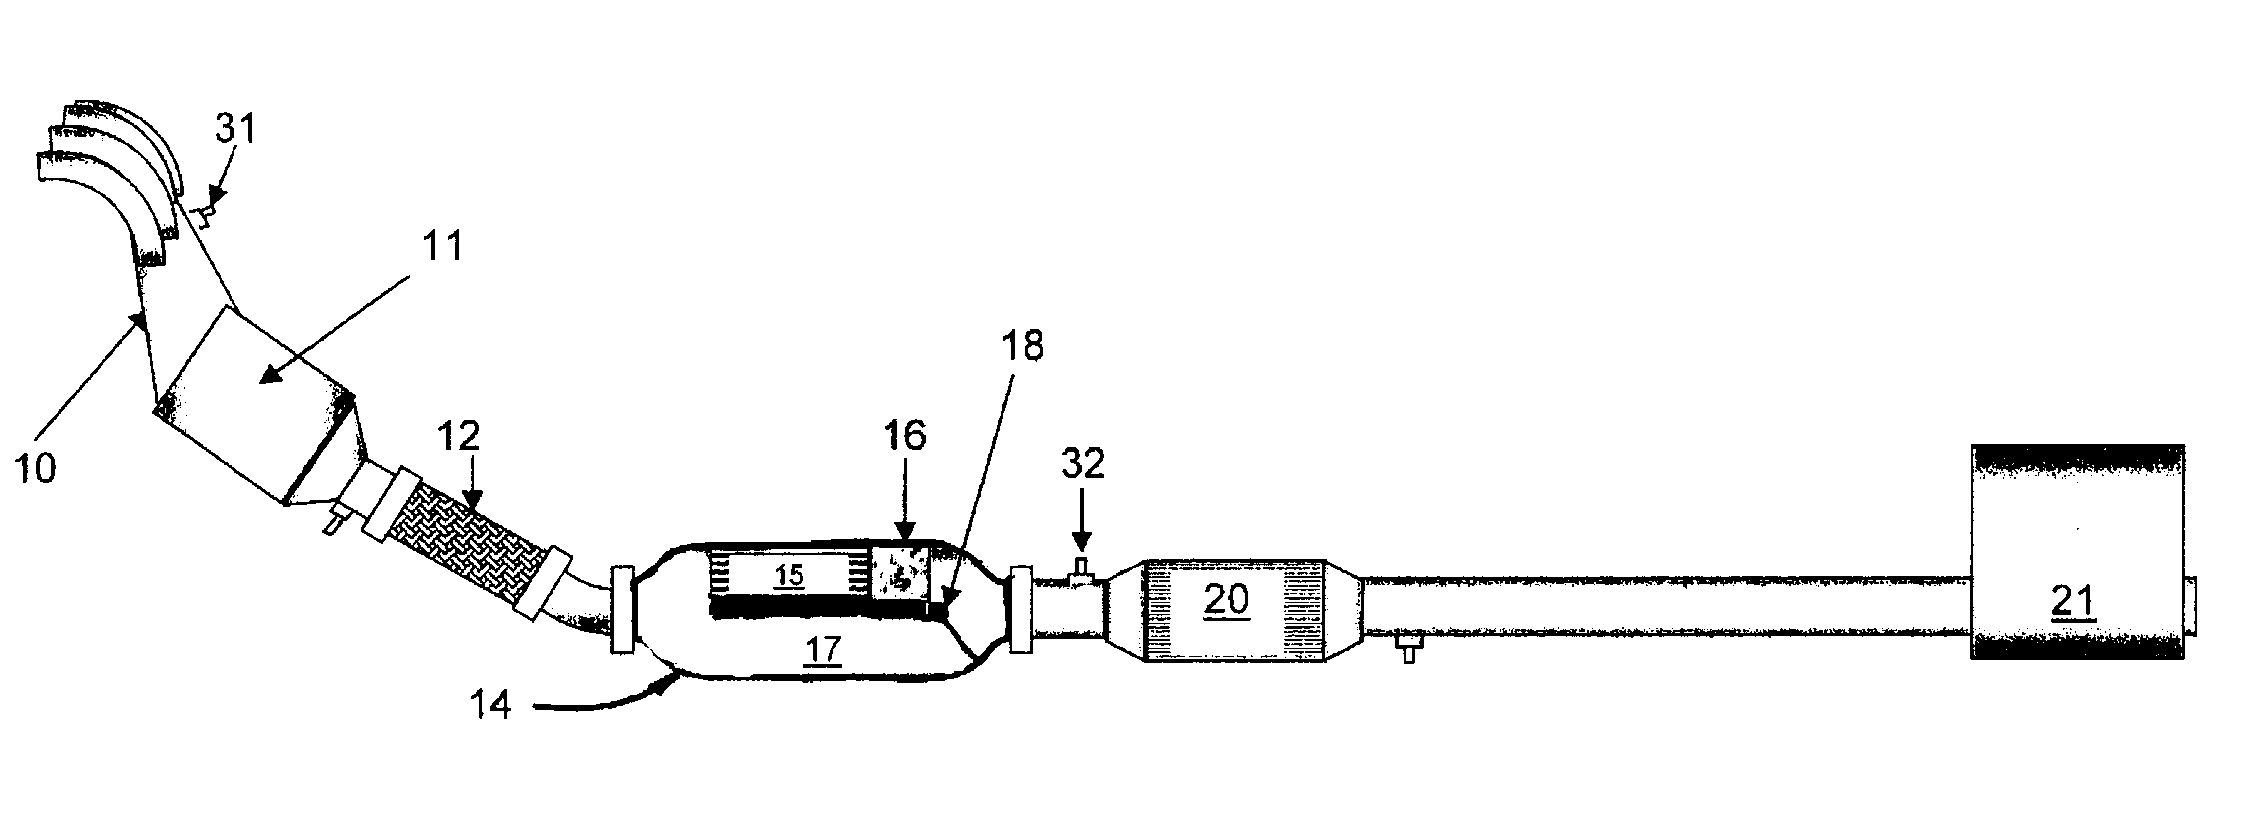 Emission Control System For An Engine